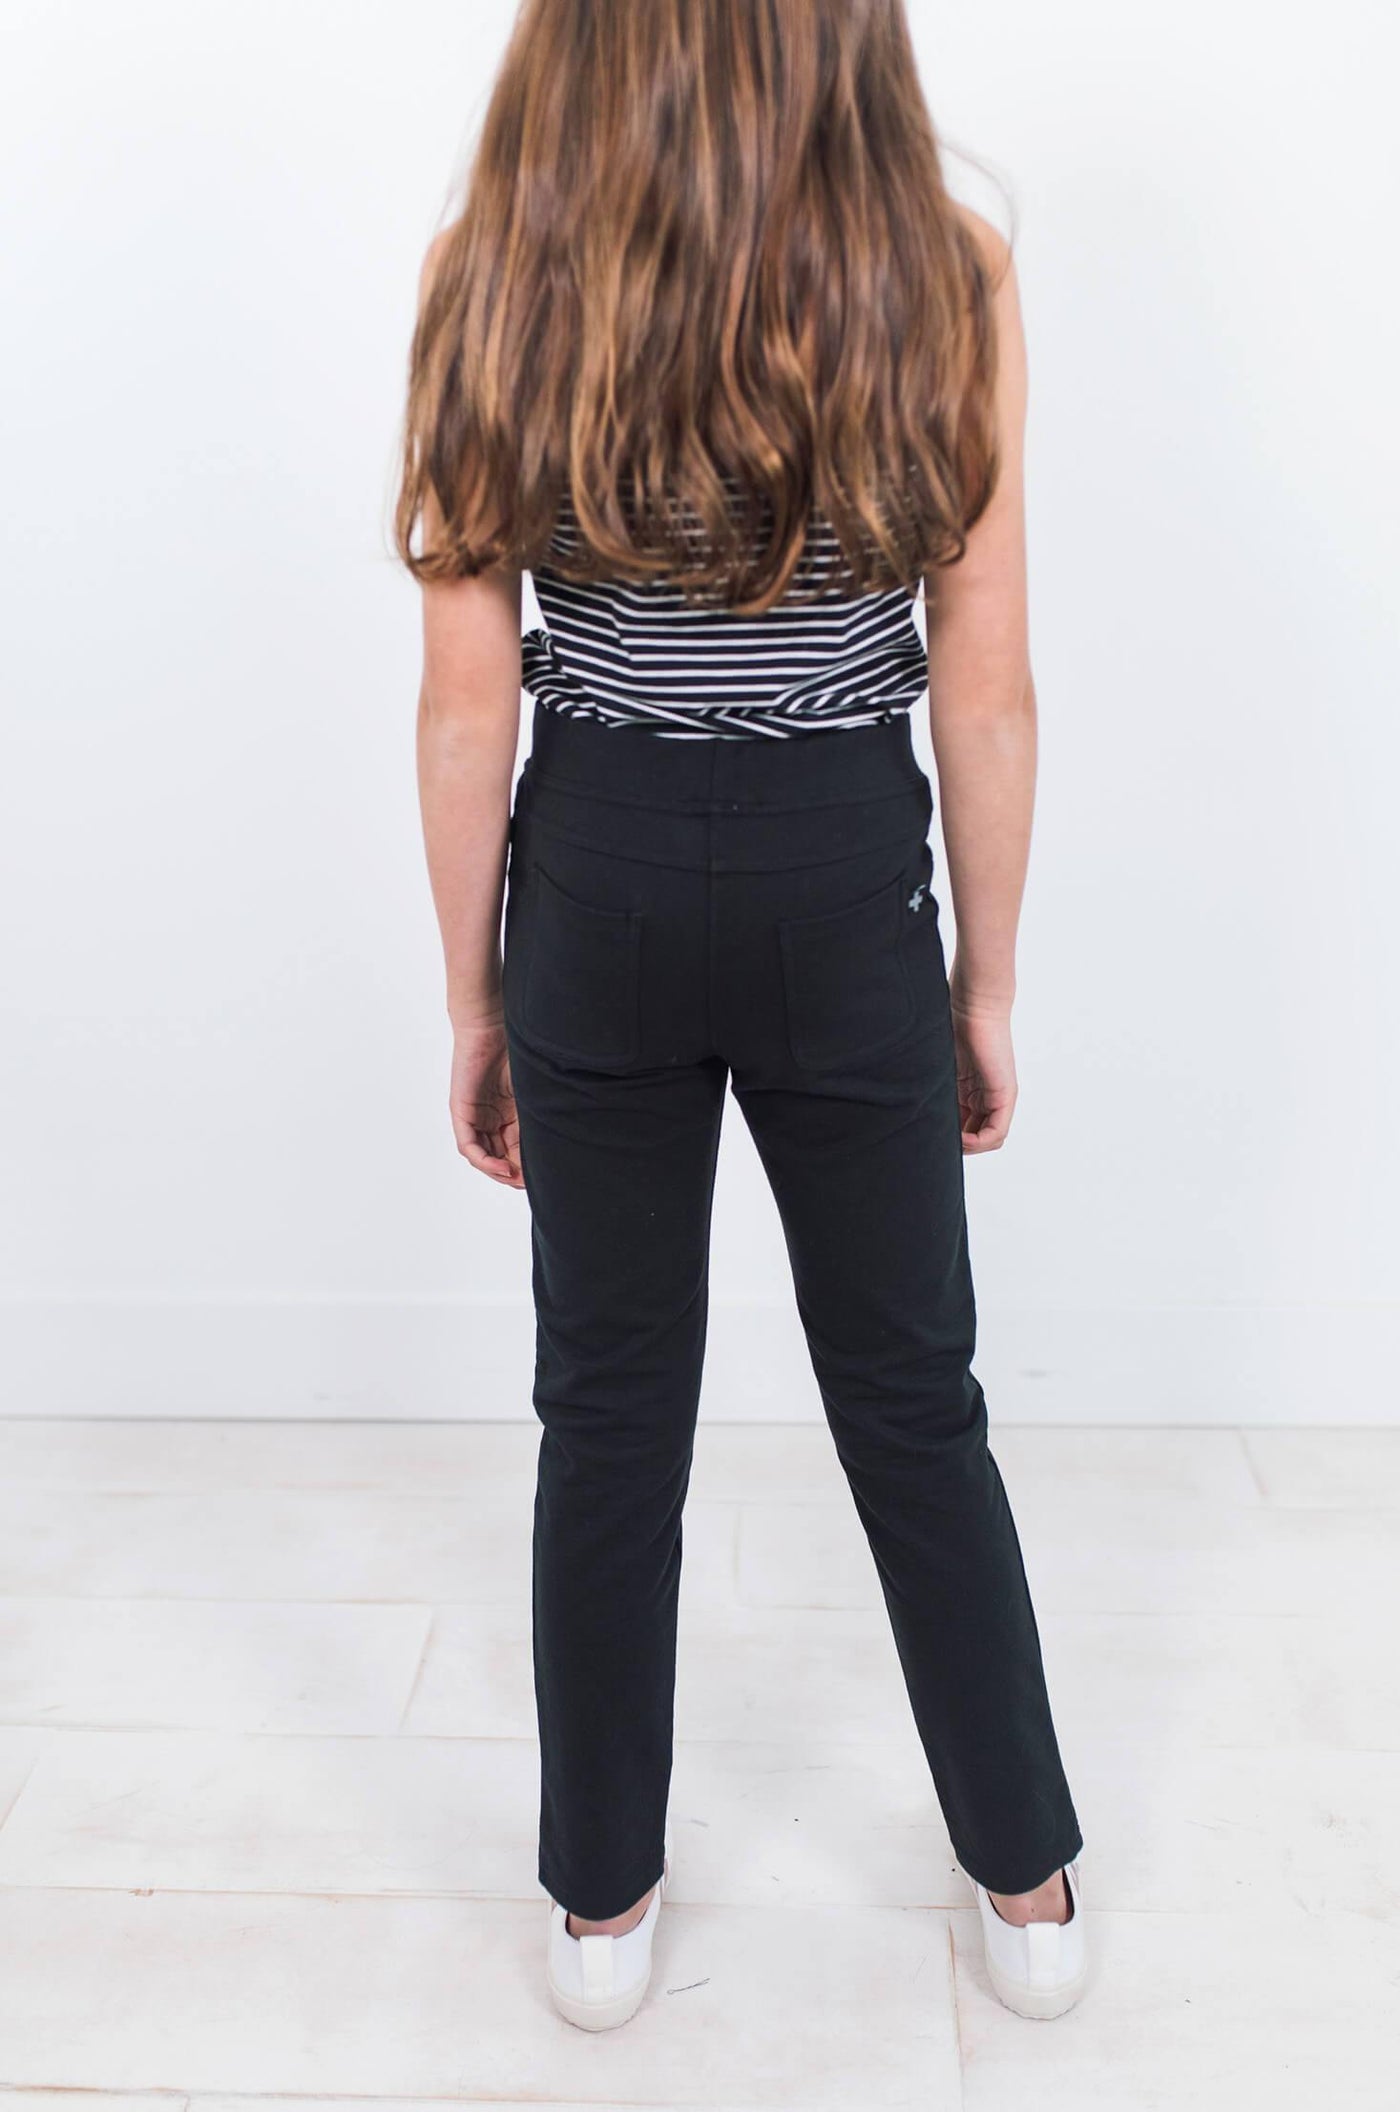 PUNCTUATION Stretch Pant - Author Clothing